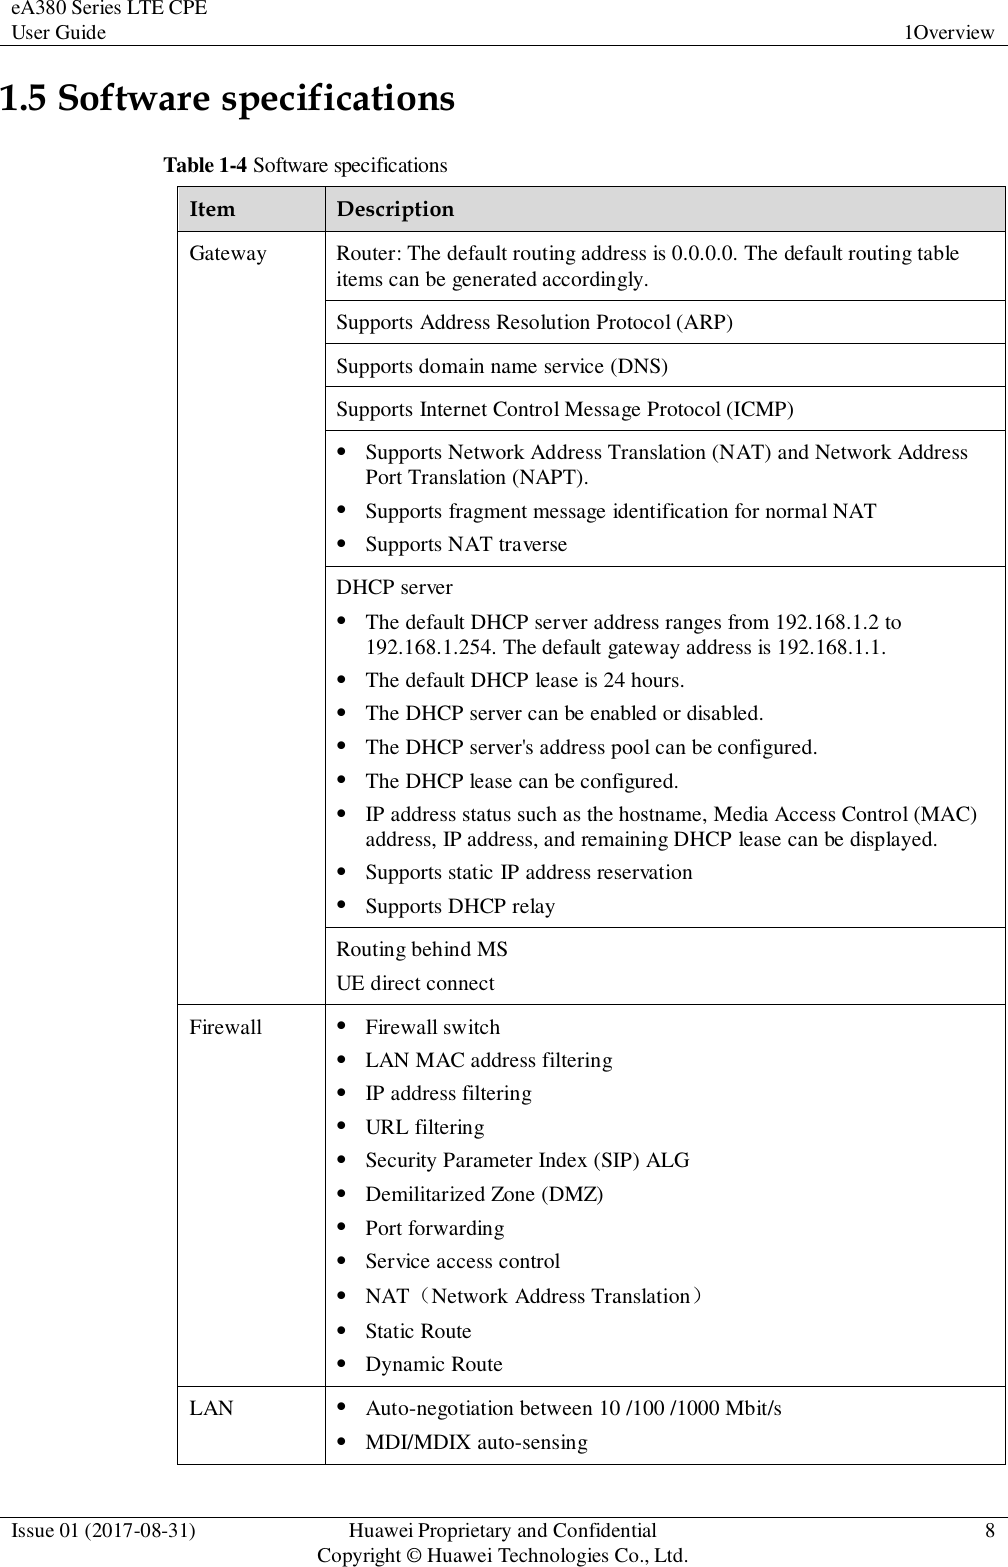 eA380 Series LTE CPE User Guide 1Overview  Issue 01 (2017-08-31) Huawei Proprietary and Confidential                                     Copyright © Huawei Technologies Co., Ltd. 8  1.5 Software specifications Table 1-4 Software specifications Item Description Gateway Router: The default routing address is 0.0.0.0. The default routing table items can be generated accordingly. Supports Address Resolution Protocol (ARP) Supports domain name service (DNS) Supports Internet Control Message Protocol (ICMP)  Supports Network Address Translation (NAT) and Network Address Port Translation (NAPT).  Supports fragment message identification for normal NAT  Supports NAT traverse DHCP server  The default DHCP server address ranges from 192.168.1.2 to 192.168.1.254. The default gateway address is 192.168.1.1.  The default DHCP lease is 24 hours.  The DHCP server can be enabled or disabled.  The DHCP server&apos;s address pool can be configured.  The DHCP lease can be configured.  IP address status such as the hostname, Media Access Control (MAC) address, IP address, and remaining DHCP lease can be displayed.  Supports static IP address reservation  Supports DHCP relay Routing behind MS UE direct connect Firewall  Firewall switch  LAN MAC address filtering  IP address filtering  URL filtering  Security Parameter Index (SIP) ALG  Demilitarized Zone (DMZ)  Port forwarding  Service access control  NAT（Network Address Translation）  Static Route  Dynamic Route LAN  Auto-negotiation between 10 /100 /1000 Mbit/s  MDI/MDIX auto-sensing 